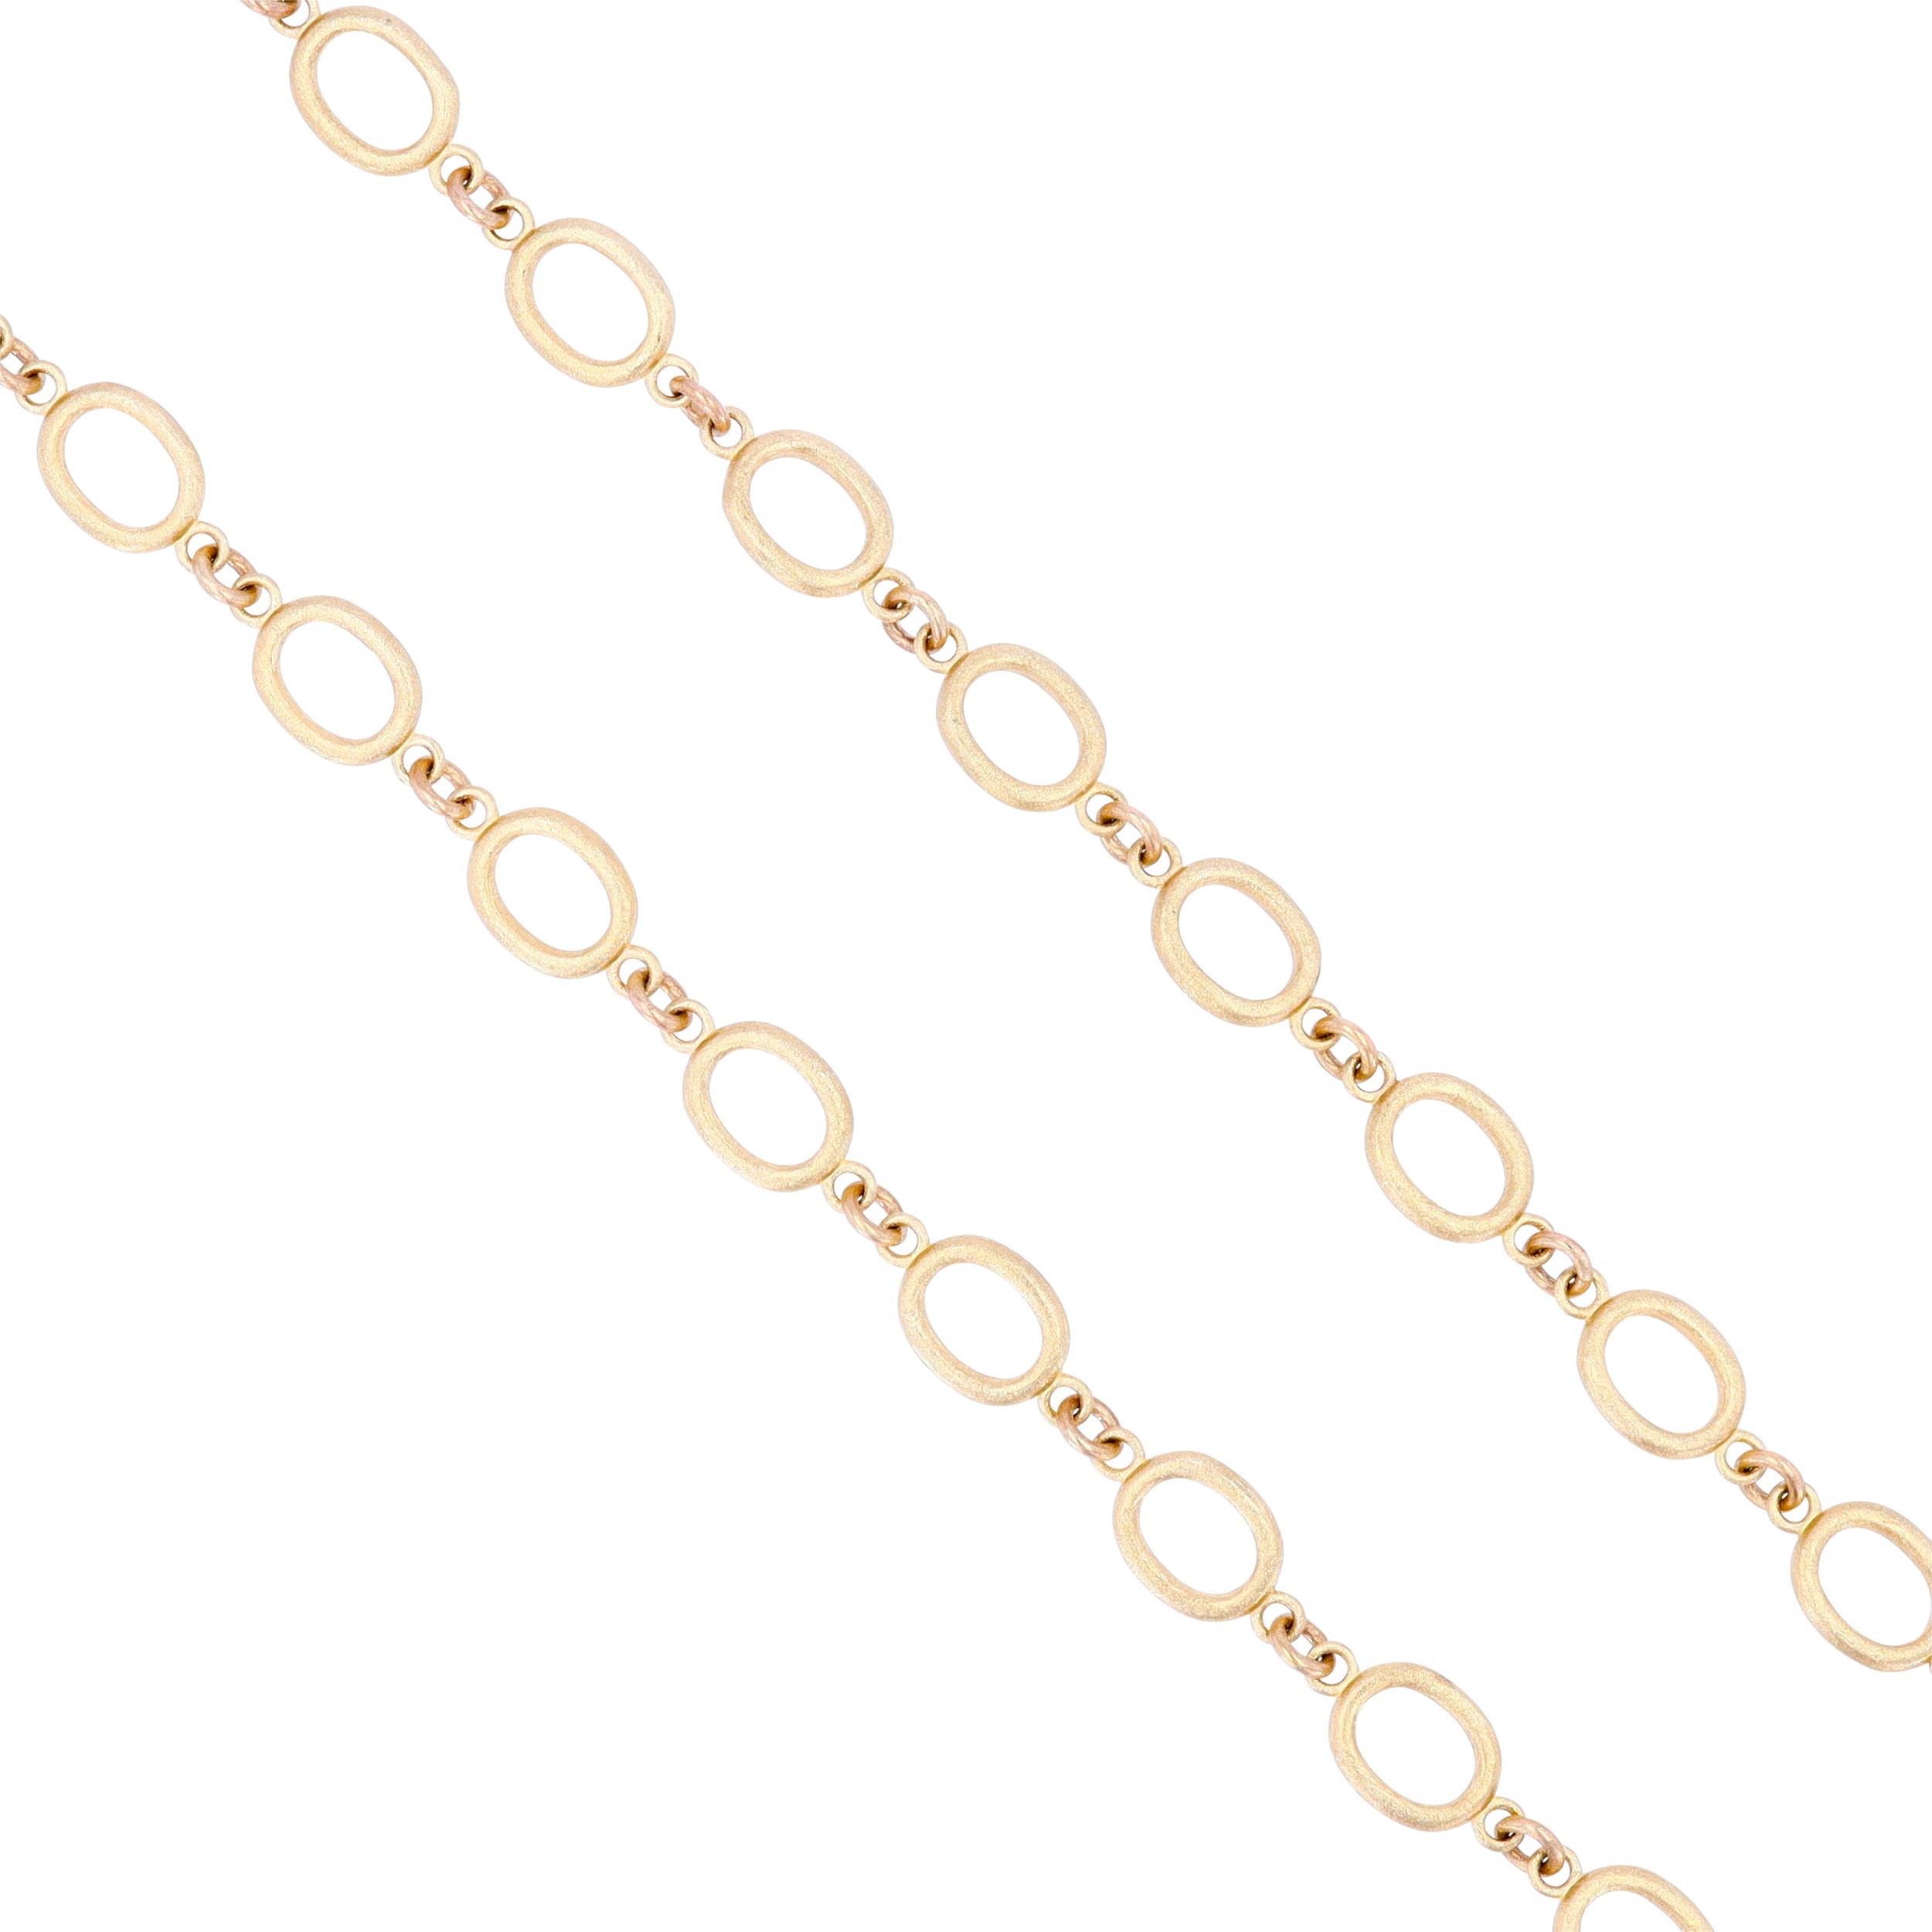 Satin Finish Oval Link Yellow Gold Chain 28"